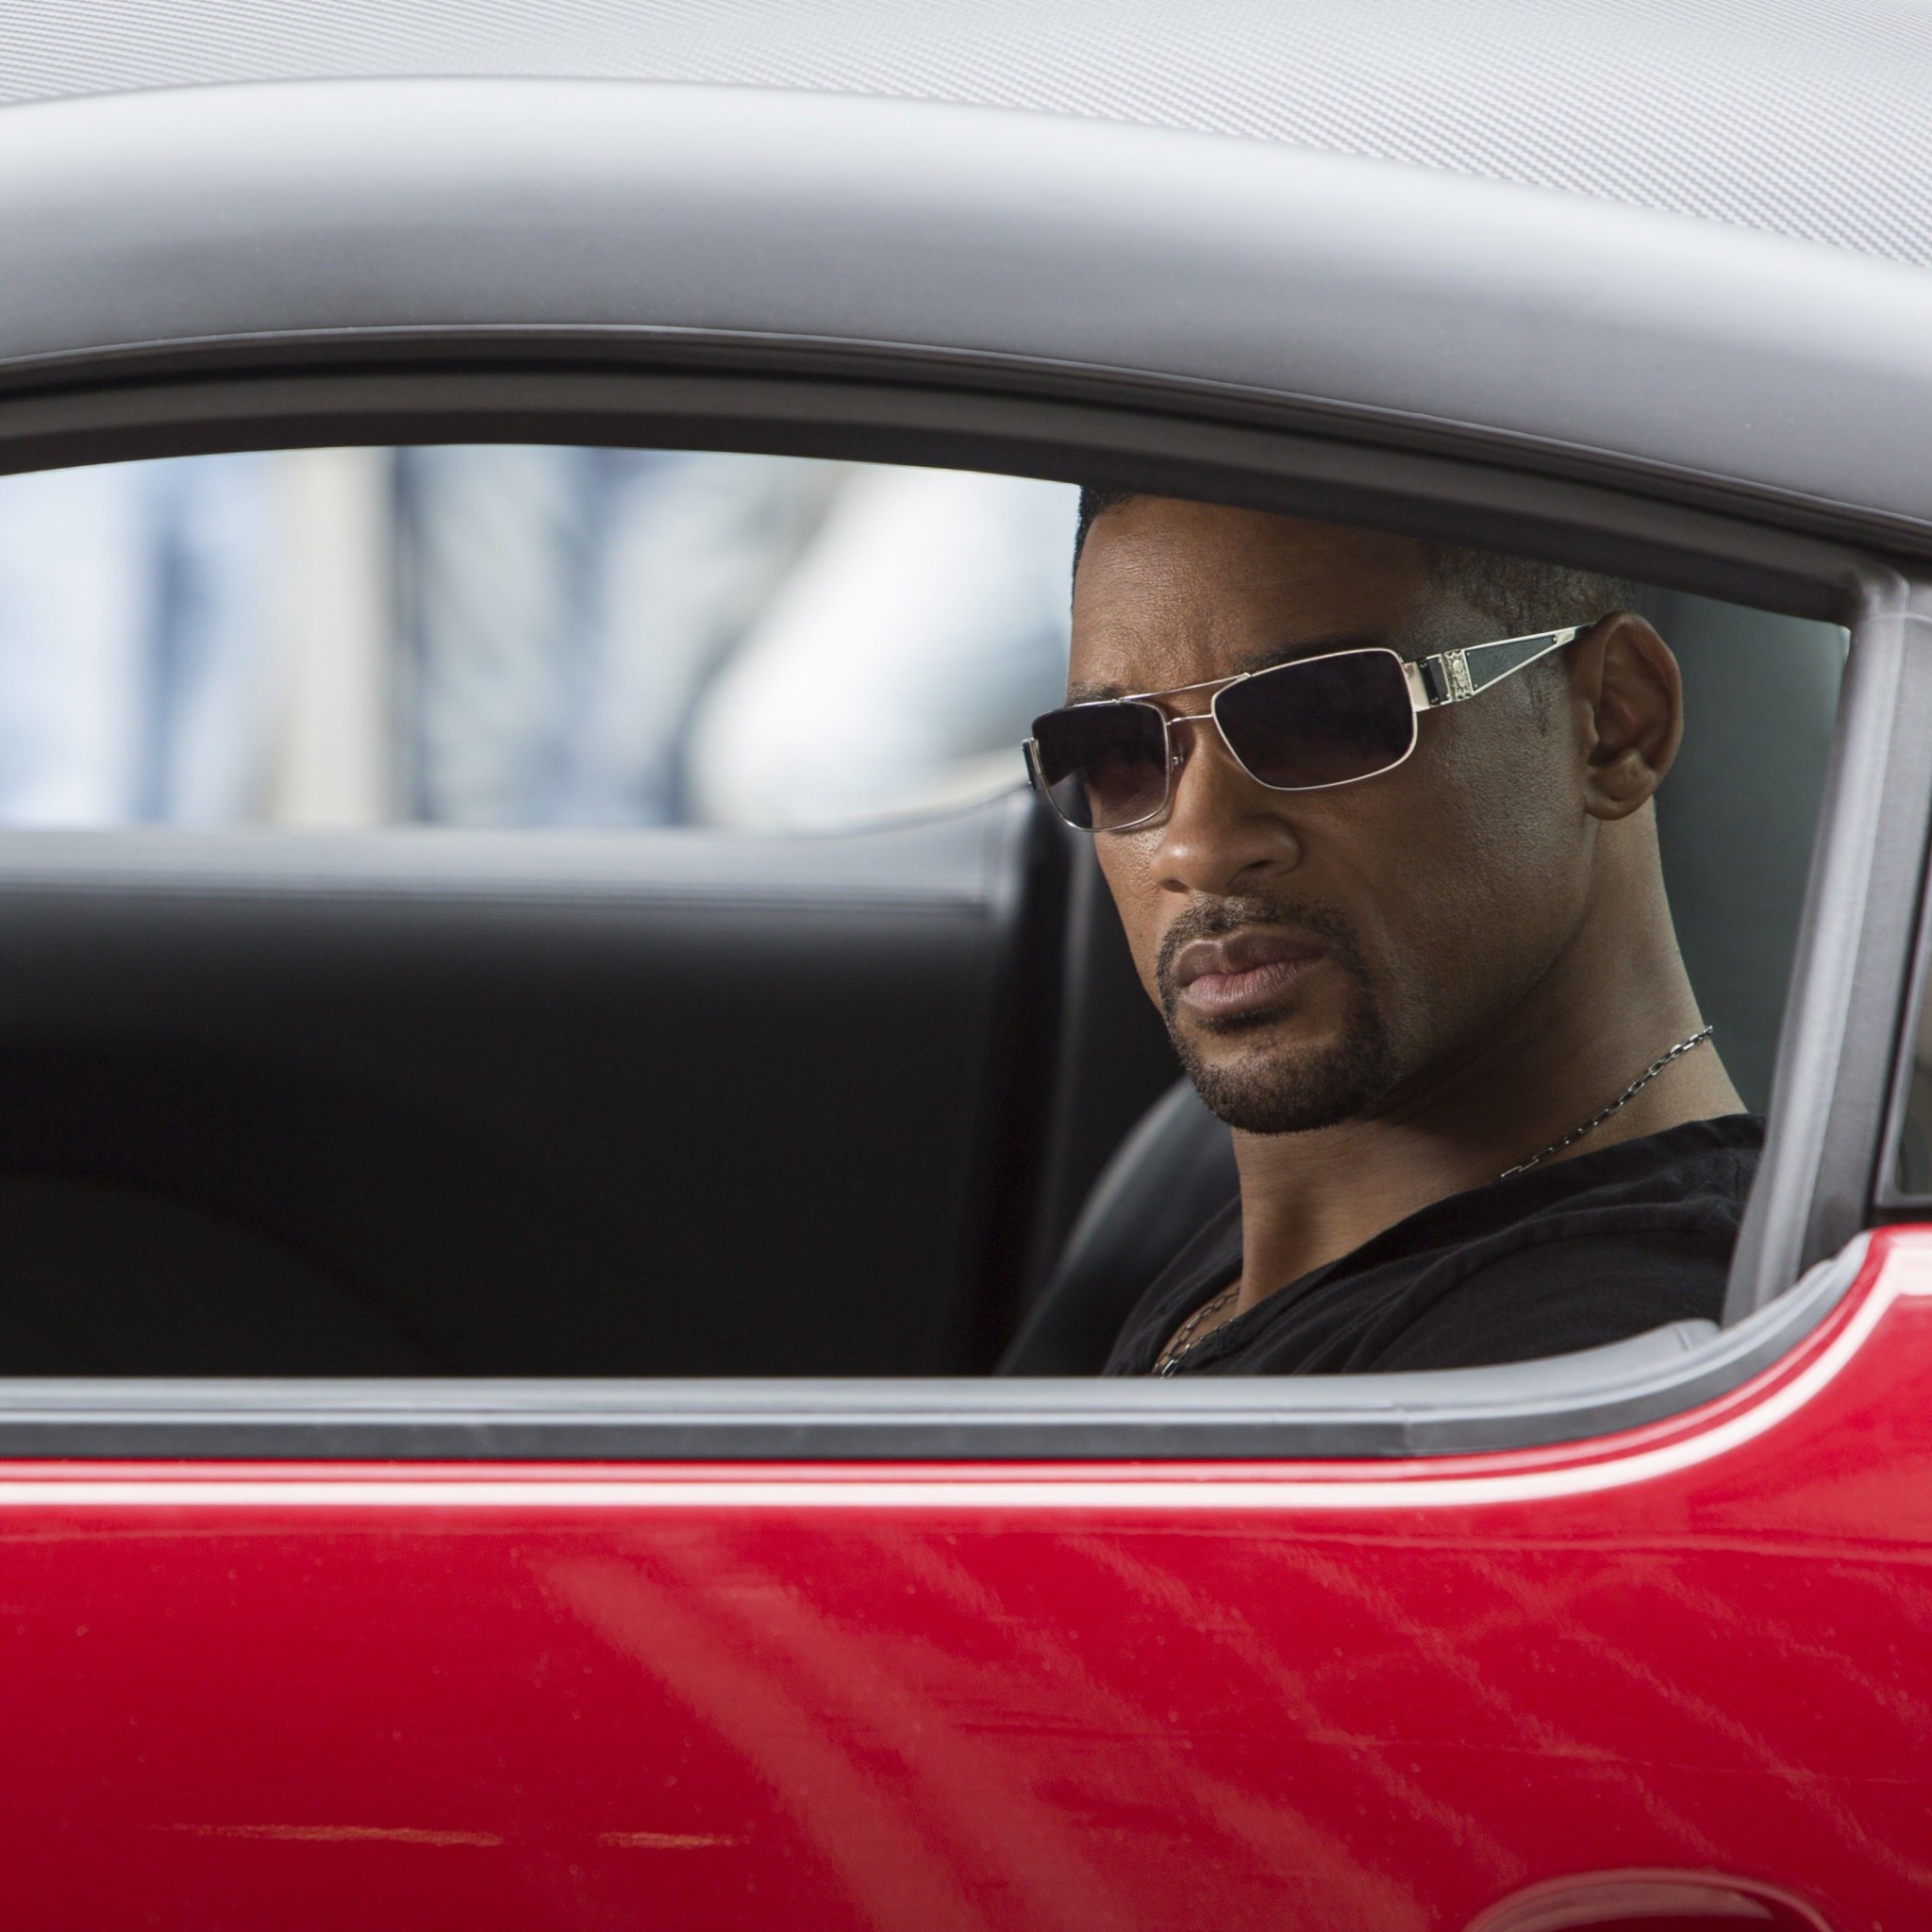 Will Smith at the shooting of "Focus" Wallpaper for Google Nexus 9